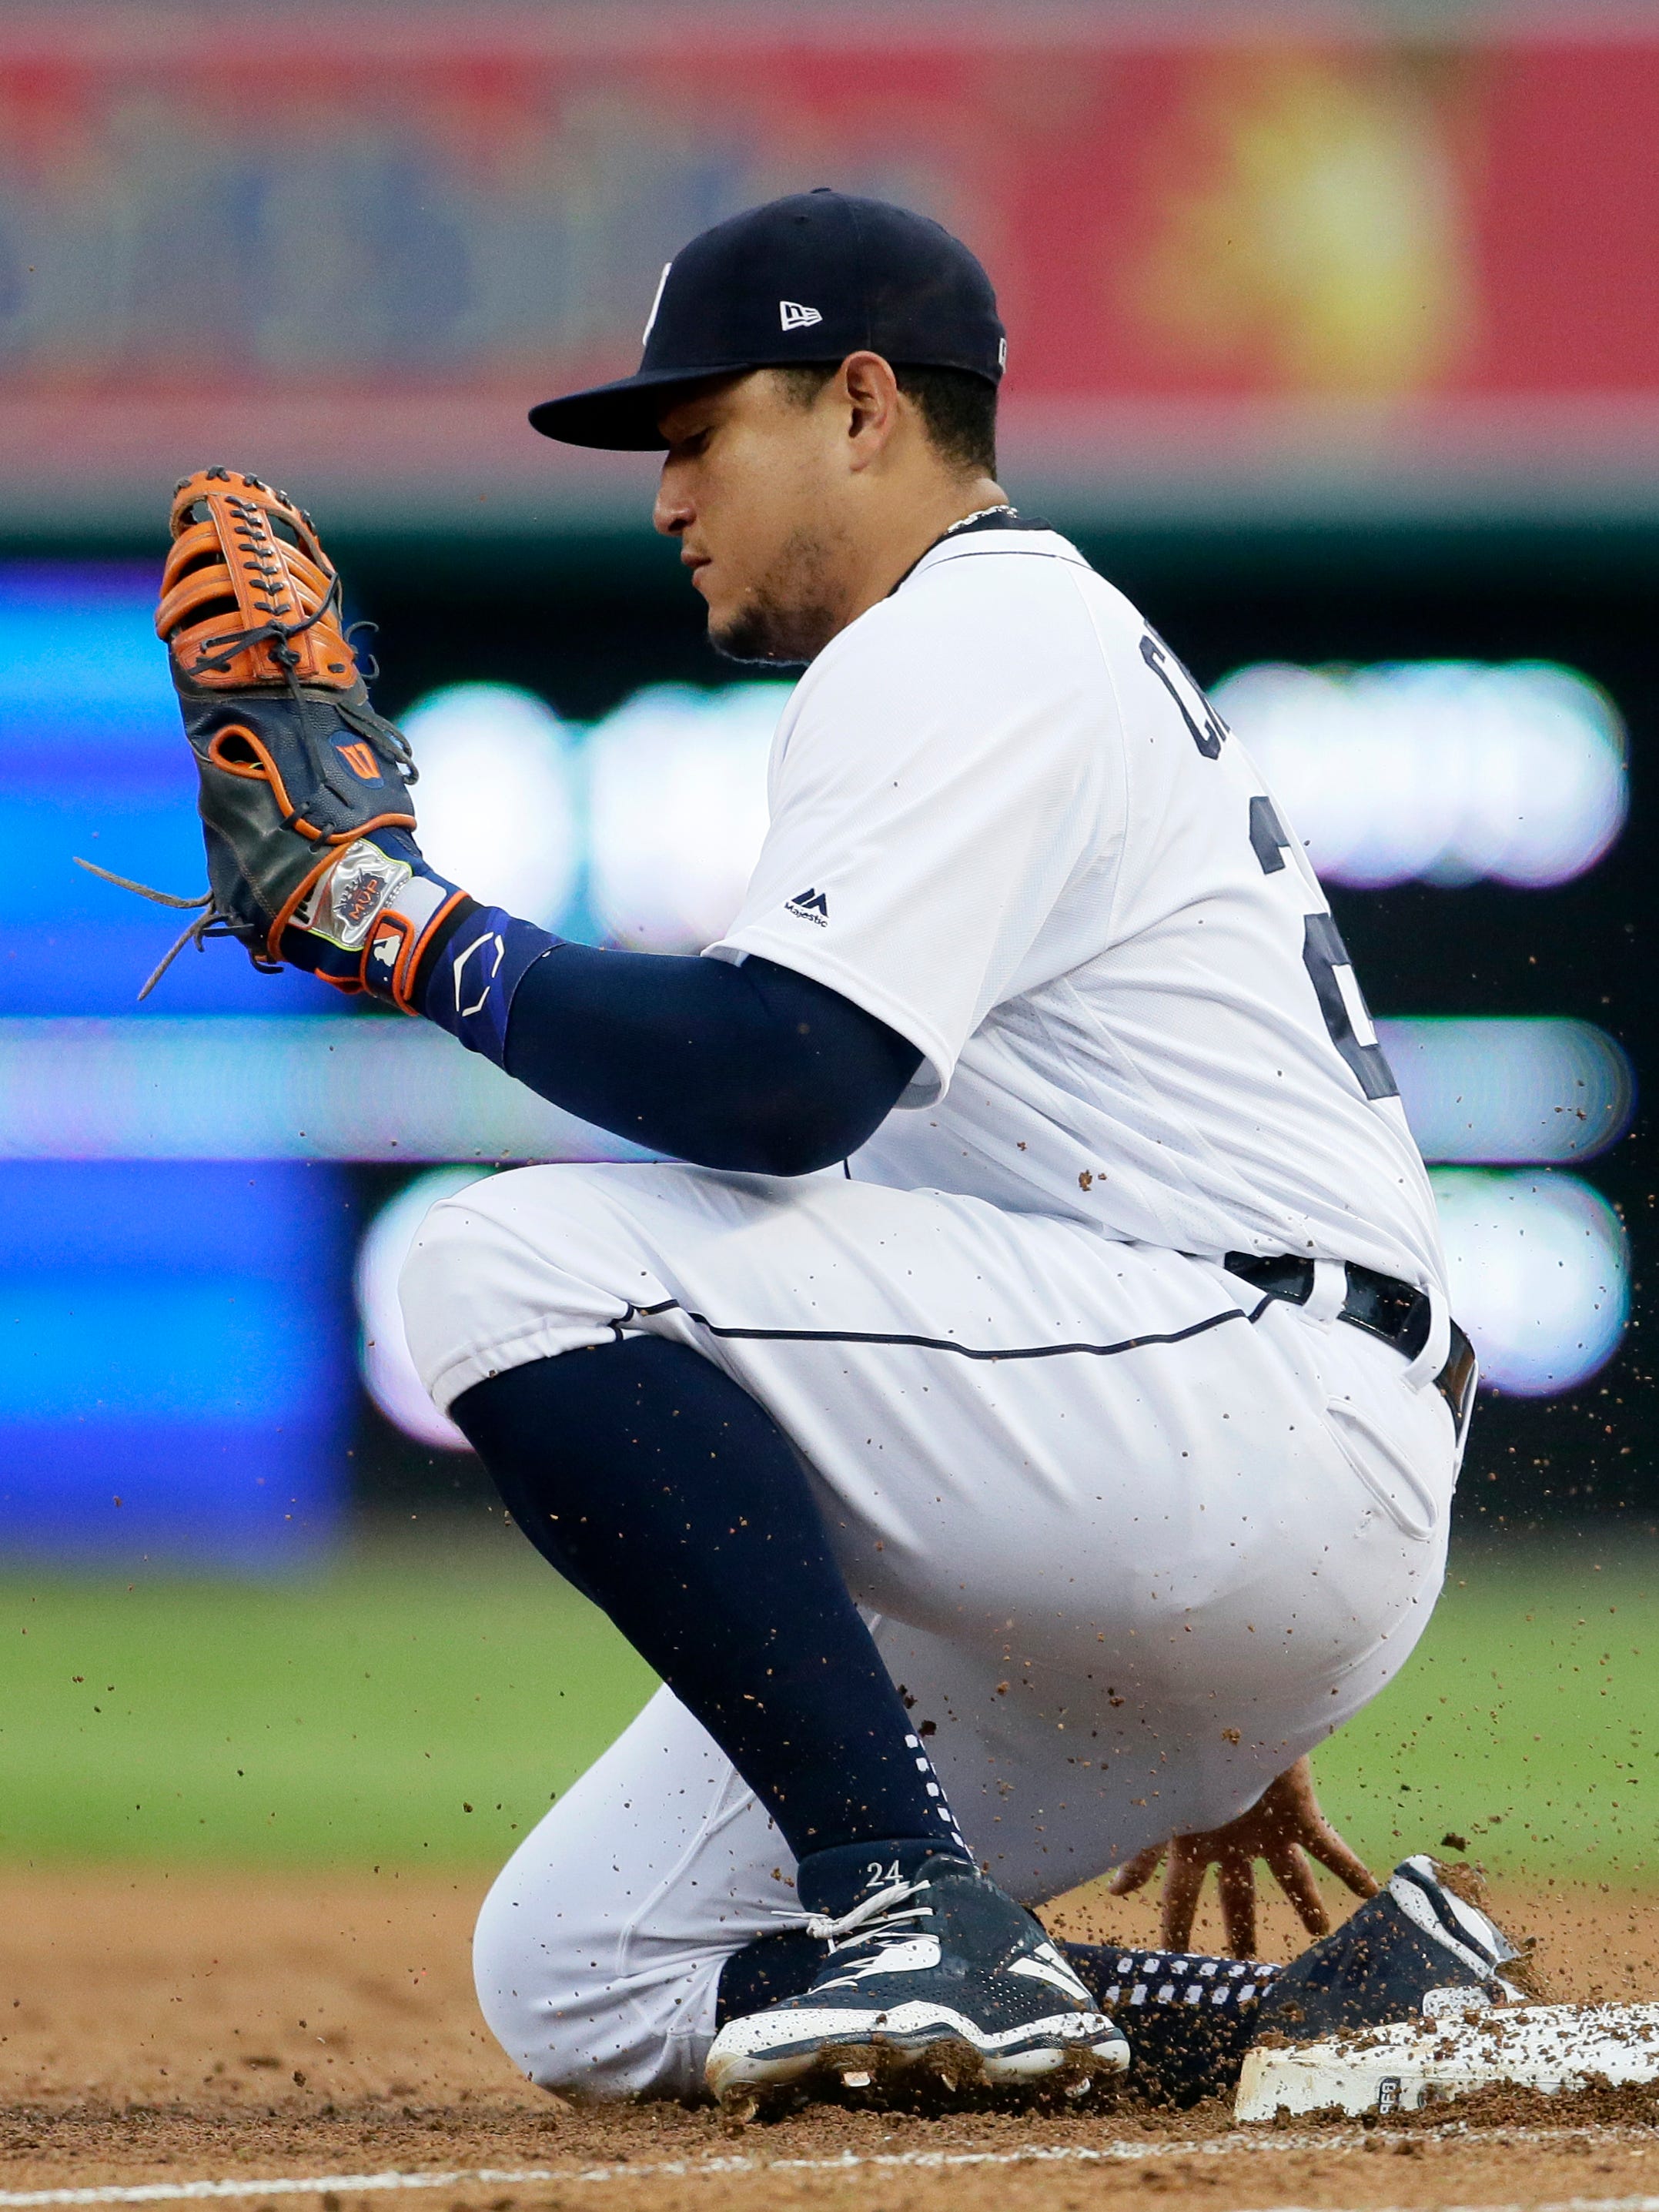 Miguel Cabrera suffered a ruptured bicep tendon in Tuesday's loss that will require season-ending surgery.